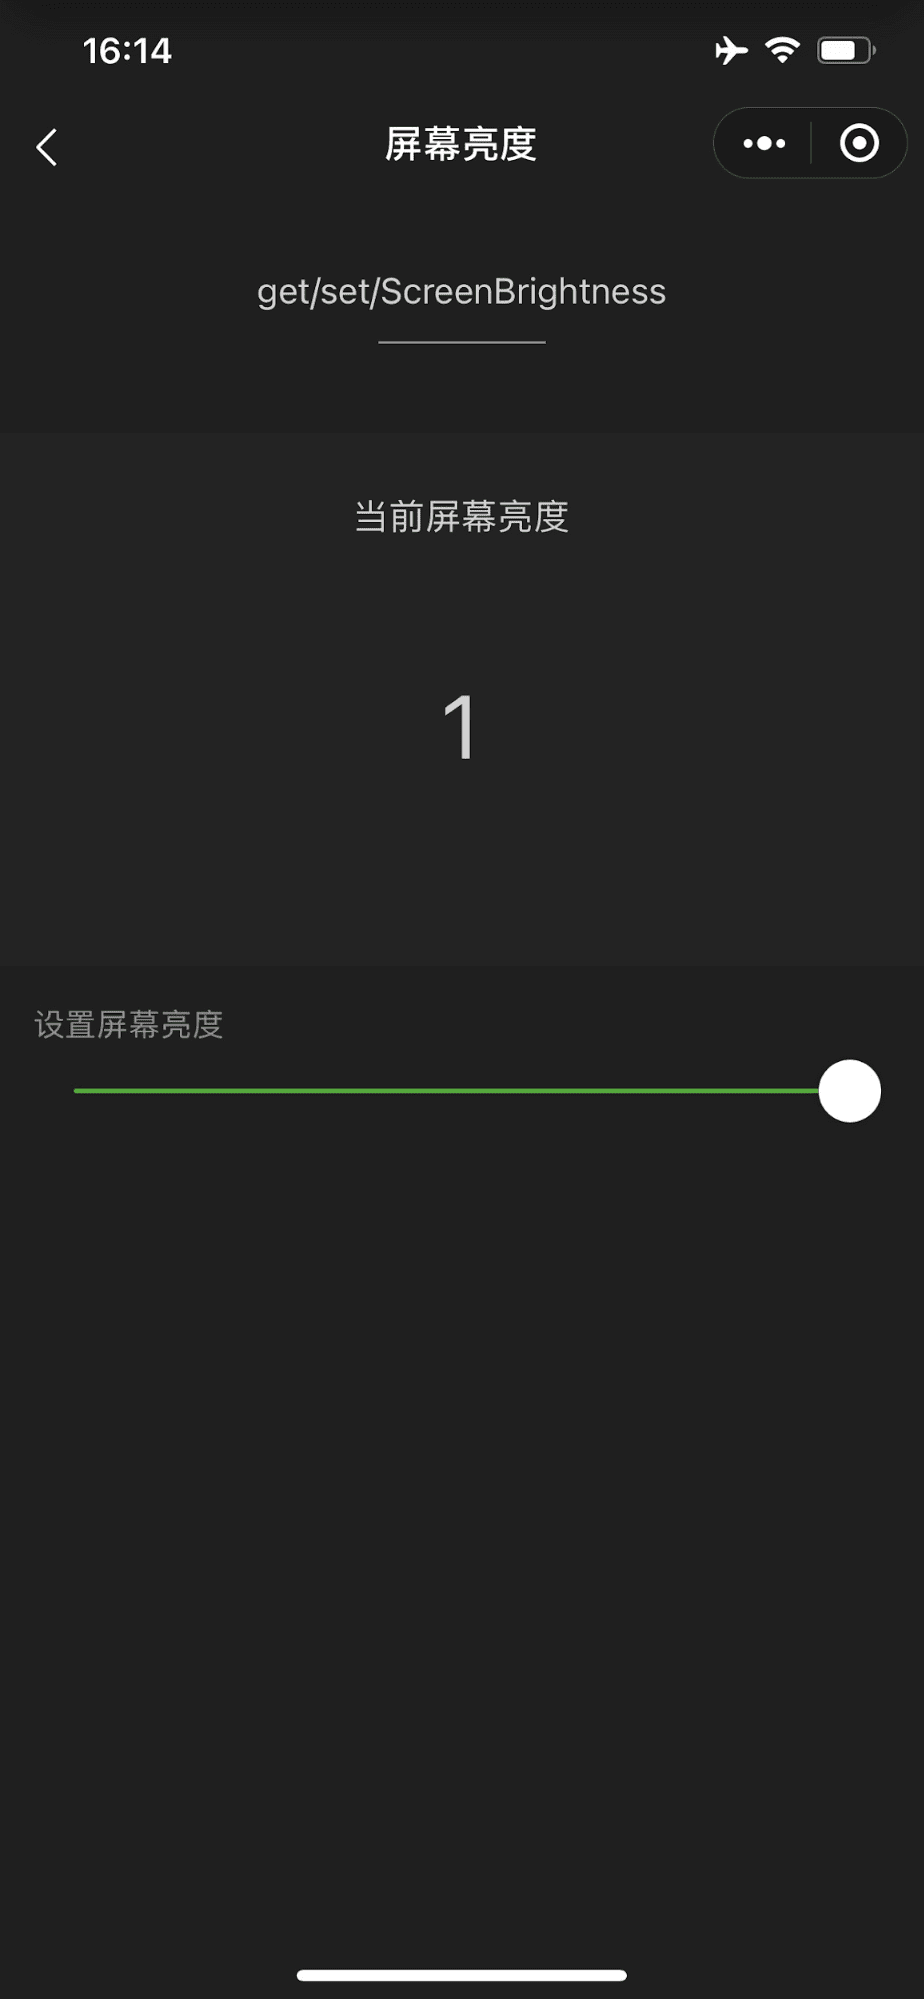 The WeChat demo mini app showing a slider that controls the screen brightness of the device moved all the way to the maximum.